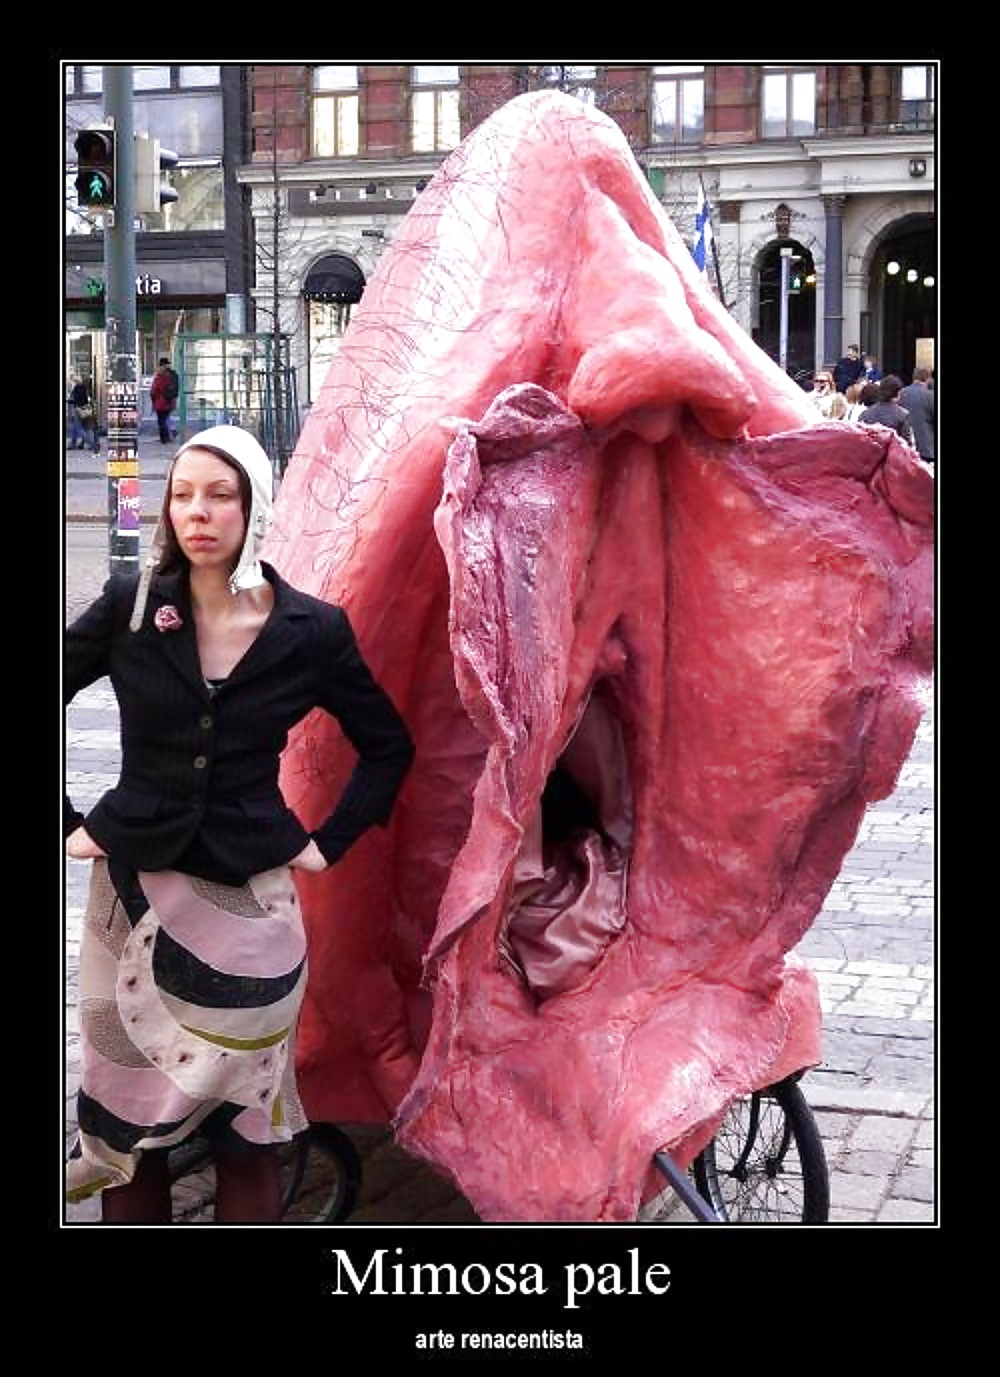 Giant Vulva Bicycle Taxi Is Freudian Wet Dream #8697892